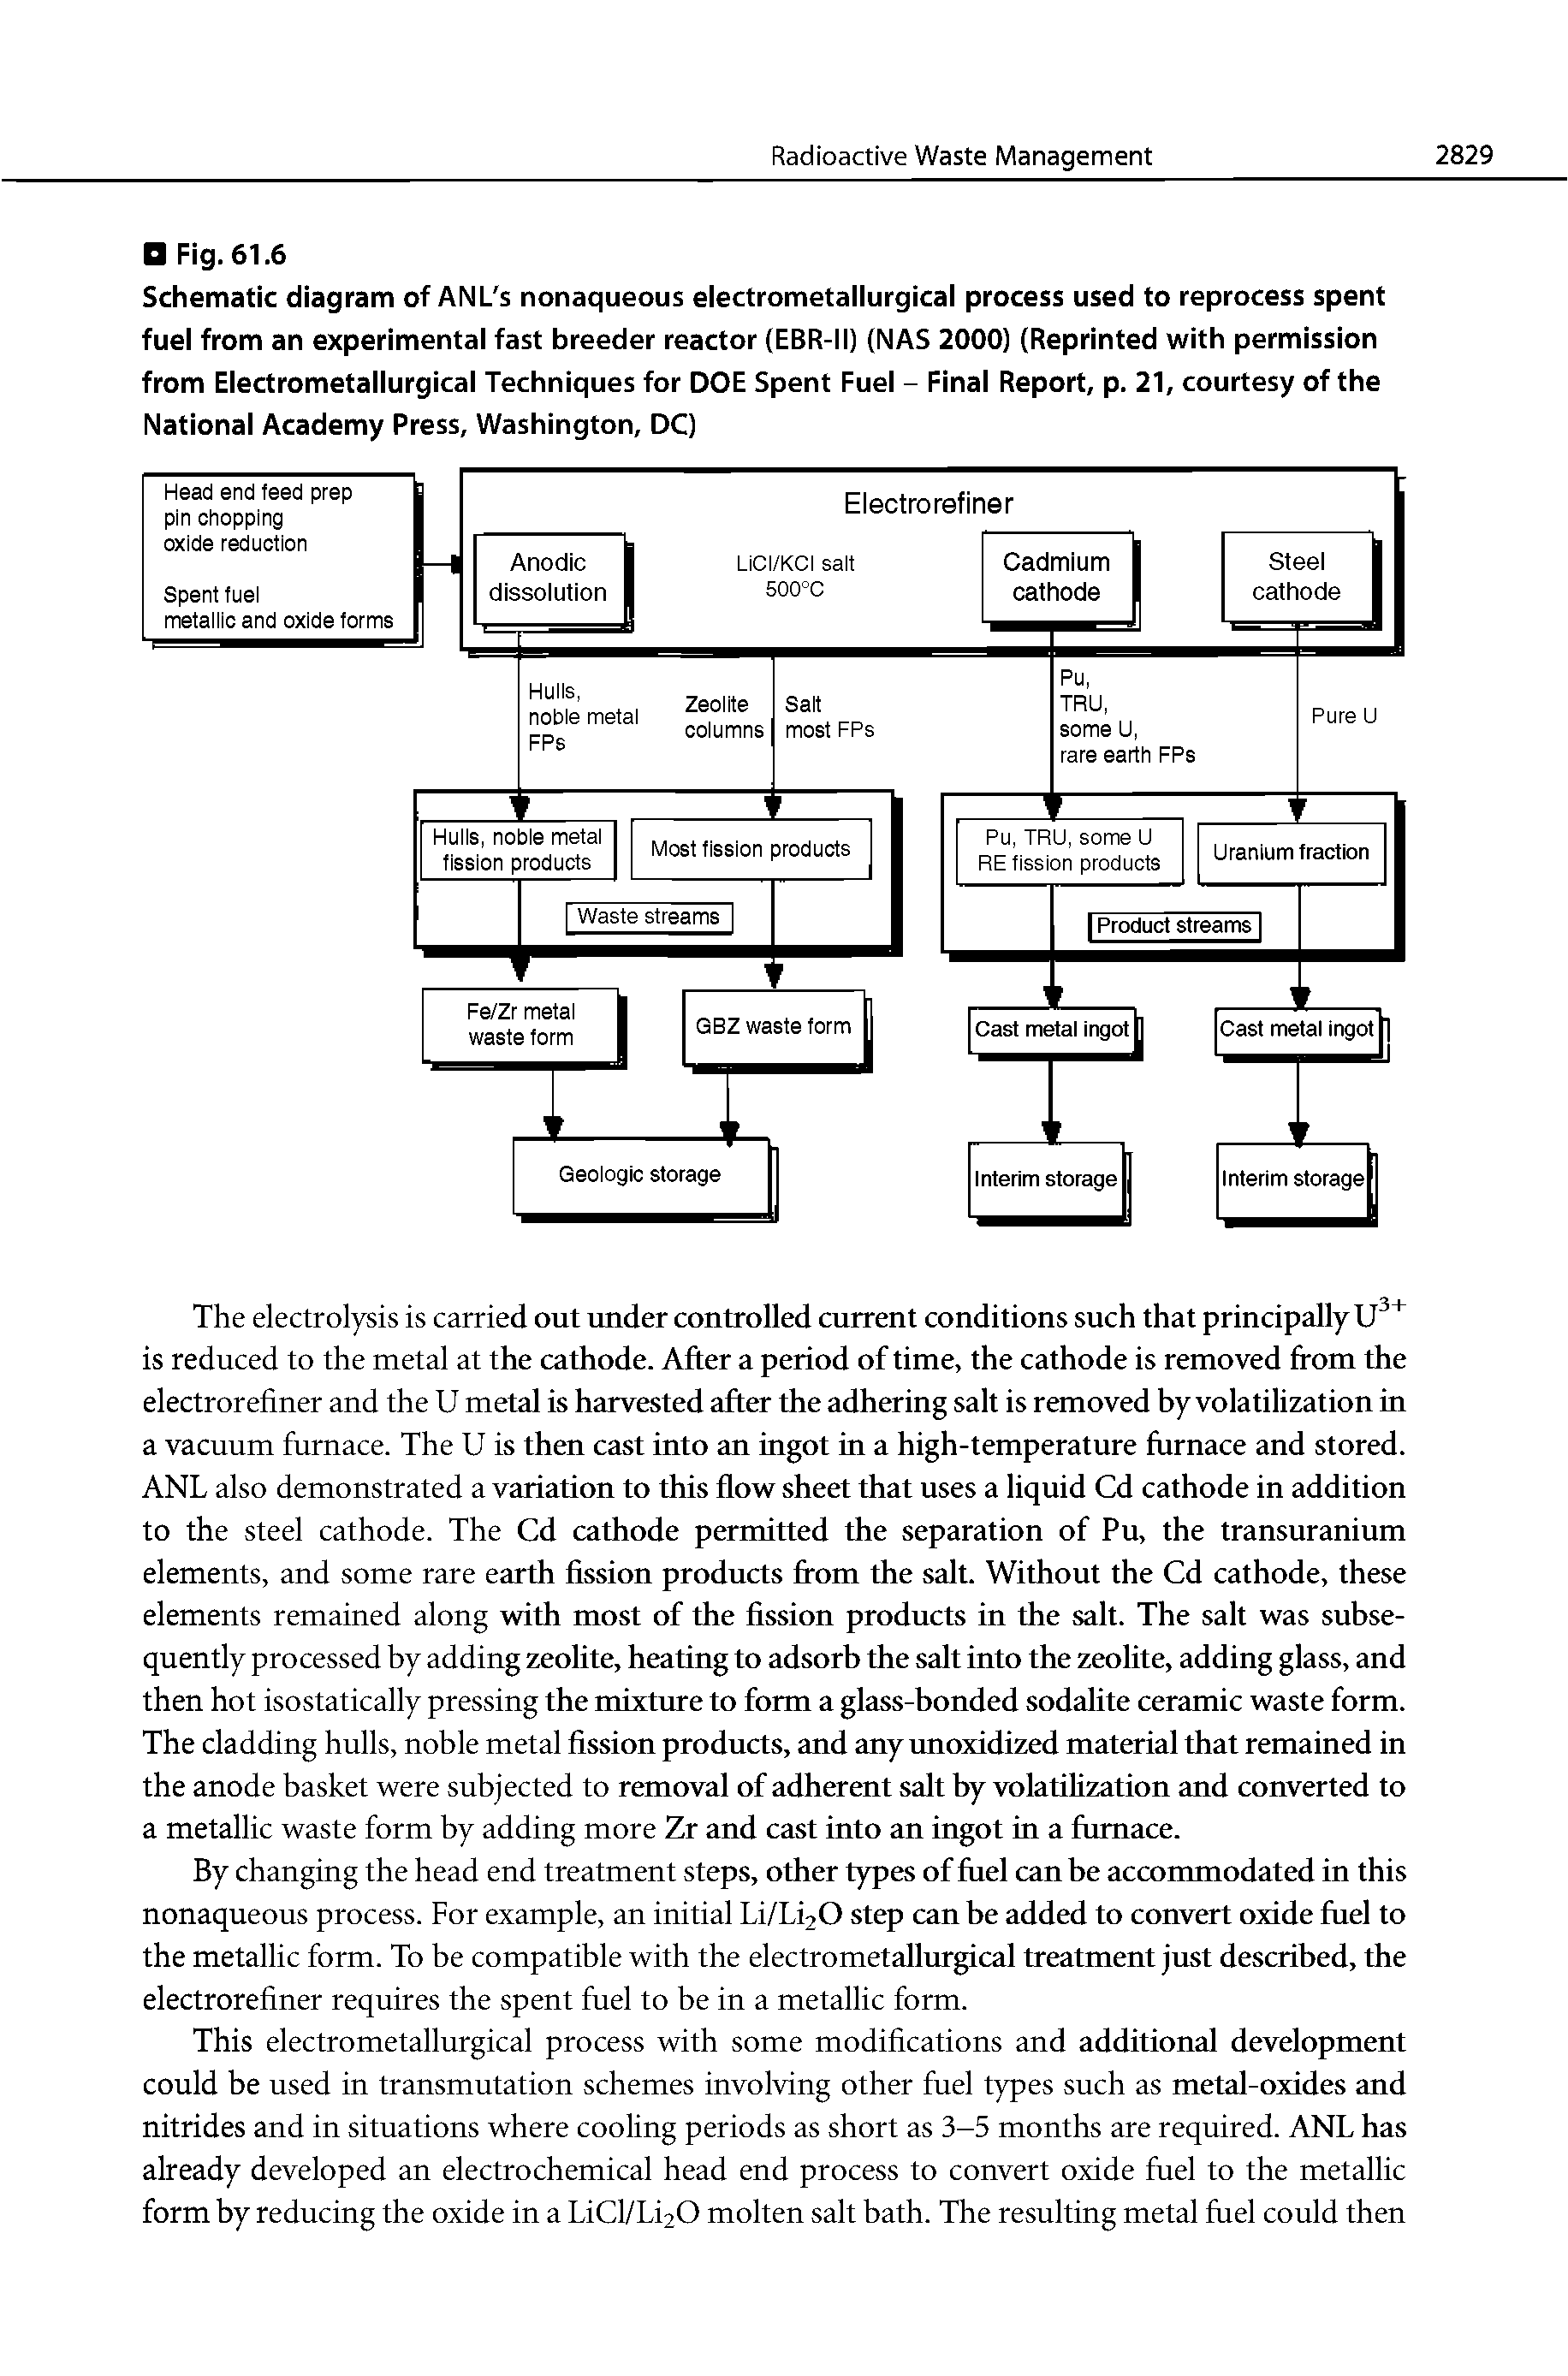 Schematic diagram of ANL s nonaqueous eiectrometaiiurgicai process used to reprocess spent fuel from an experimentai fast breeder reactor (EBR-II) (NAS 2000] (Reprinted with permission from Eiectrometaiiurgicai Techniques for DOE Spent Fuei - Finai Report, p. 21, courtesy of the National Academy Press, Washington, DC]...